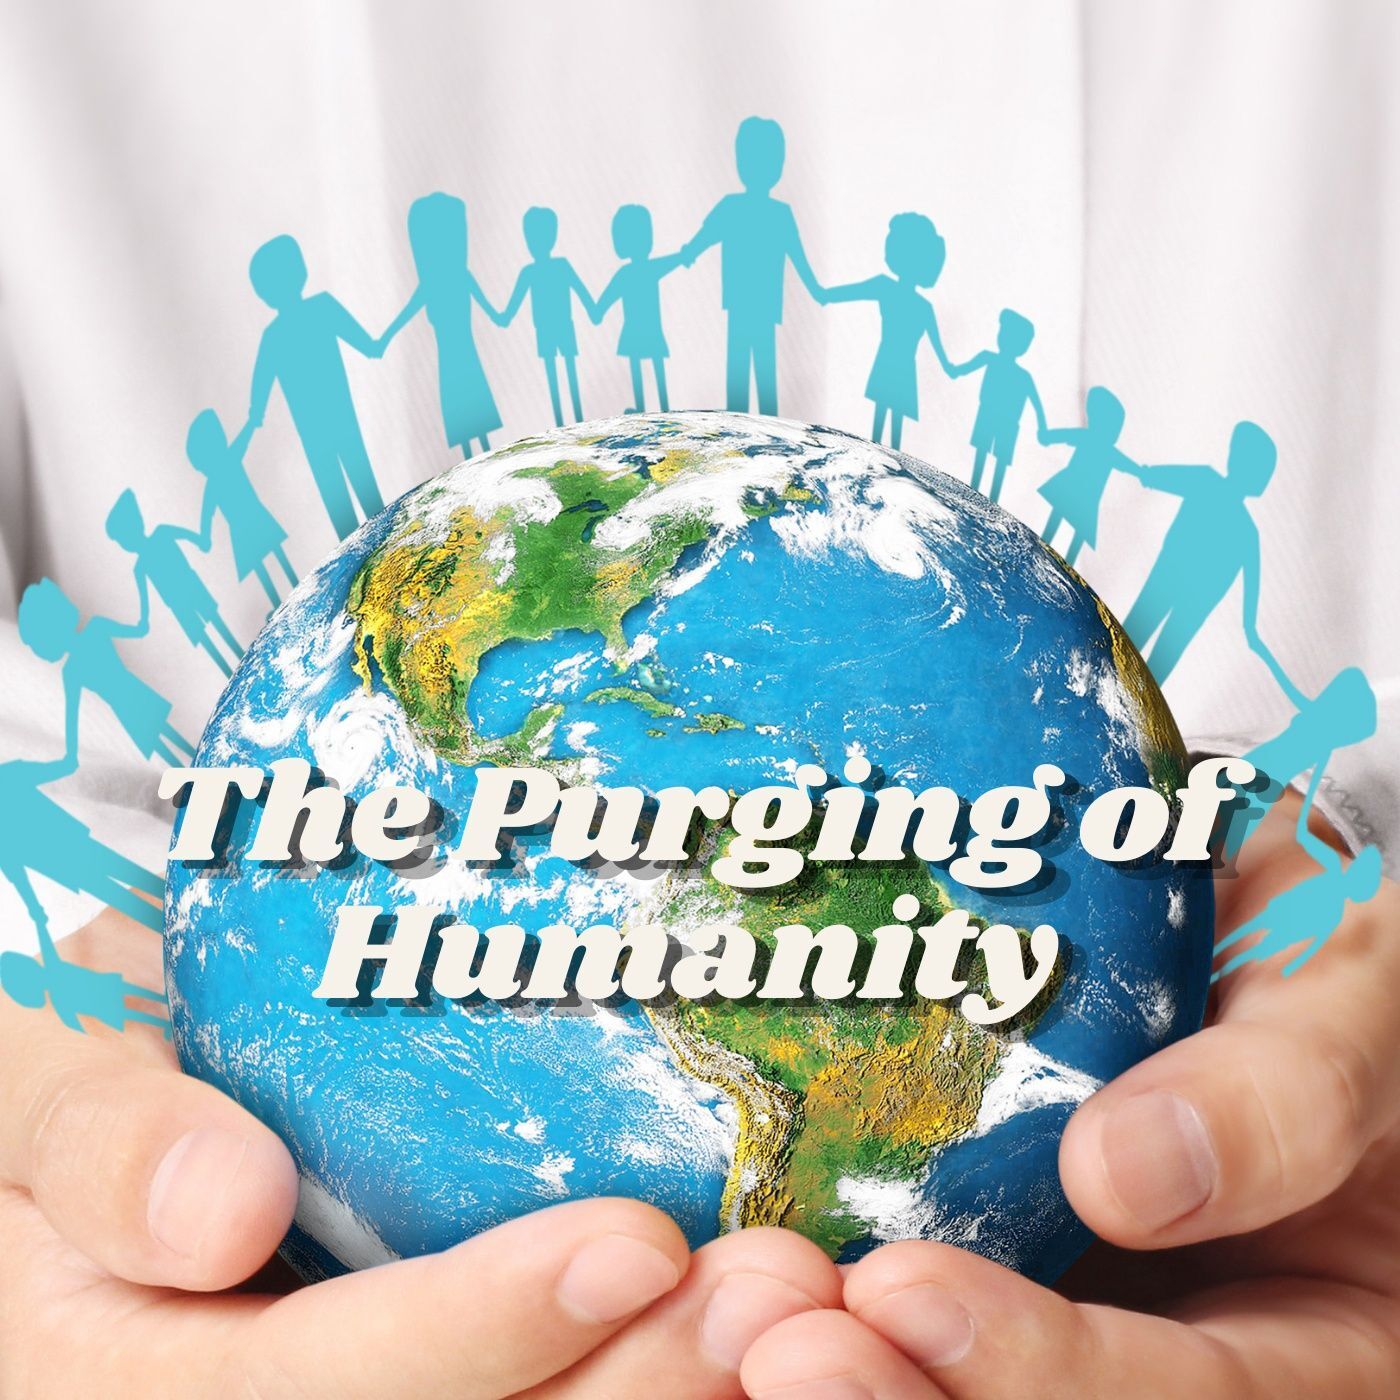 Ep. #410: The Purging of Humanity w/ Wajid Hassan